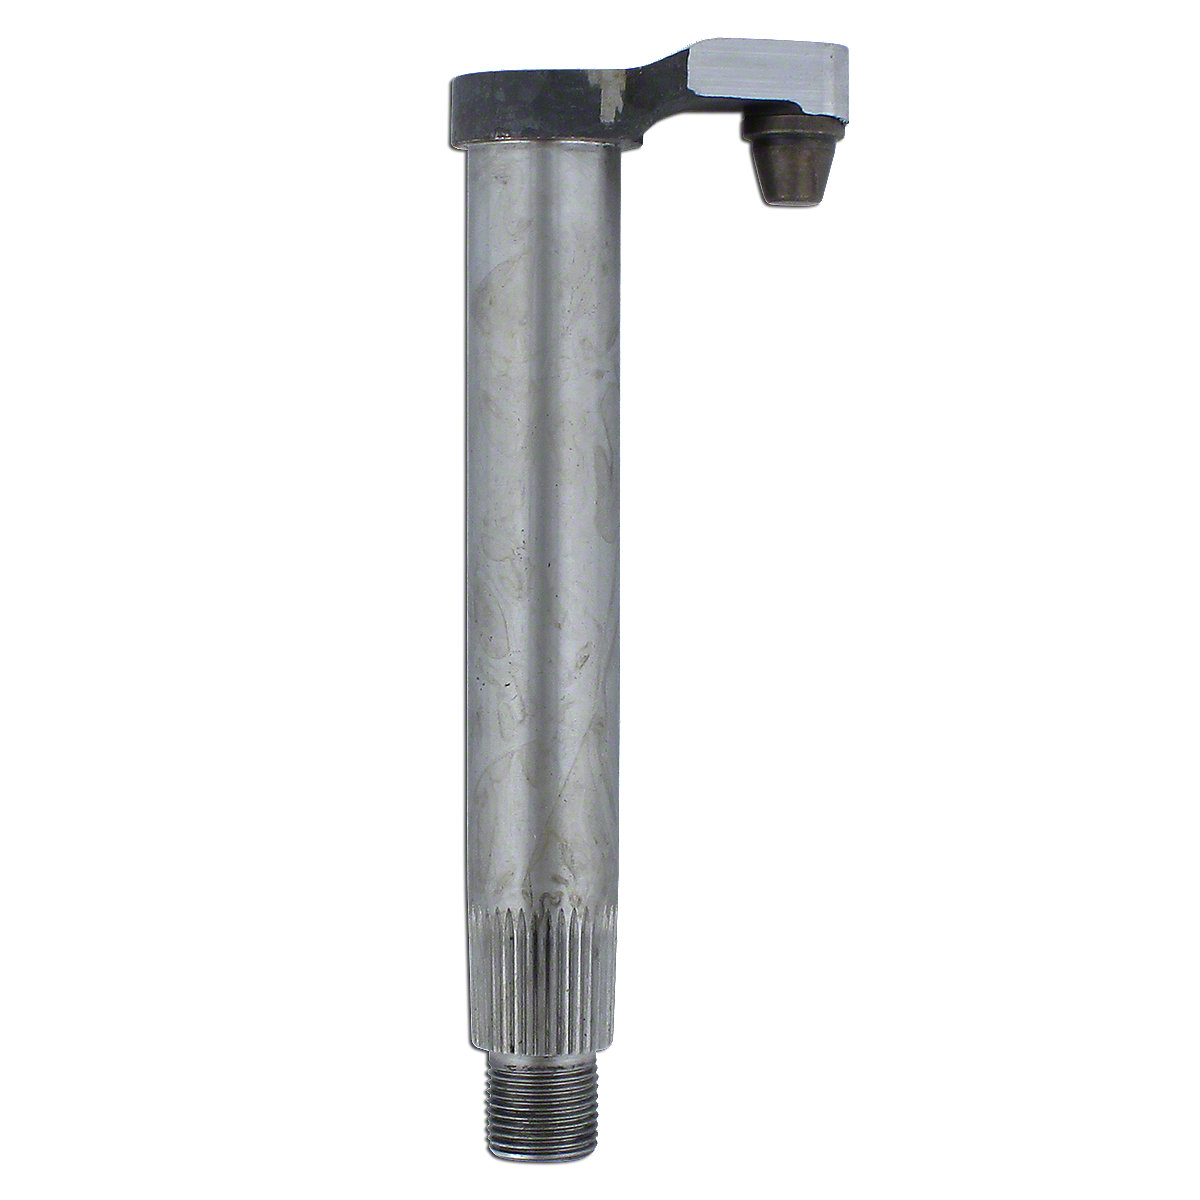 Steering Shaft With Pin For Massey Ferguson And Massey Harris: Pacer 16, Pony. 